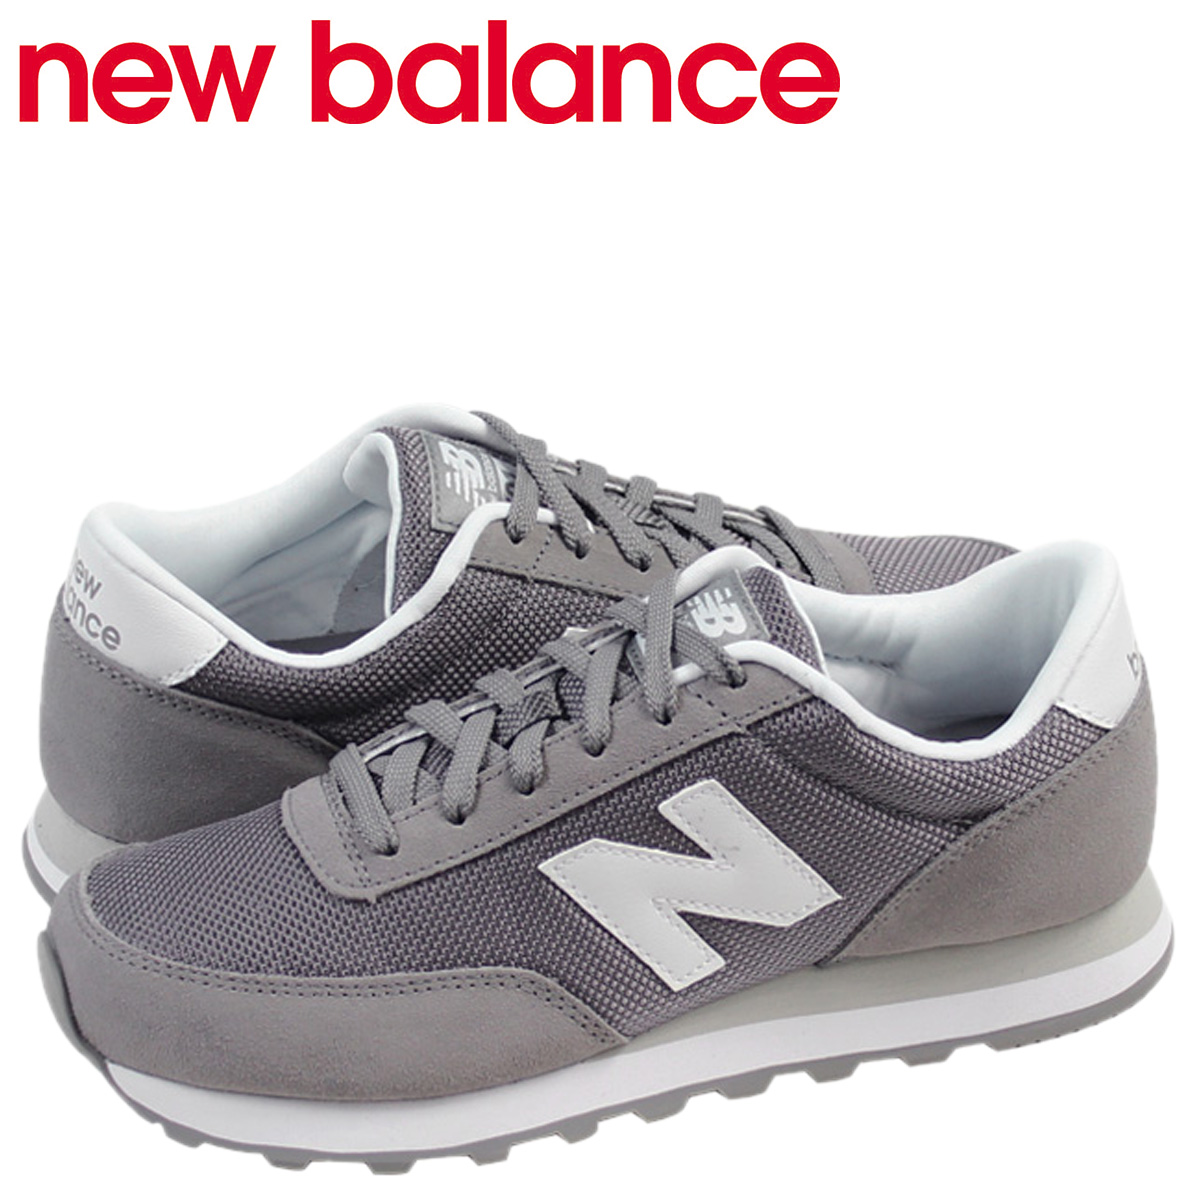 Hurry up and buy \u003e nb 501, Up to 73% OFF